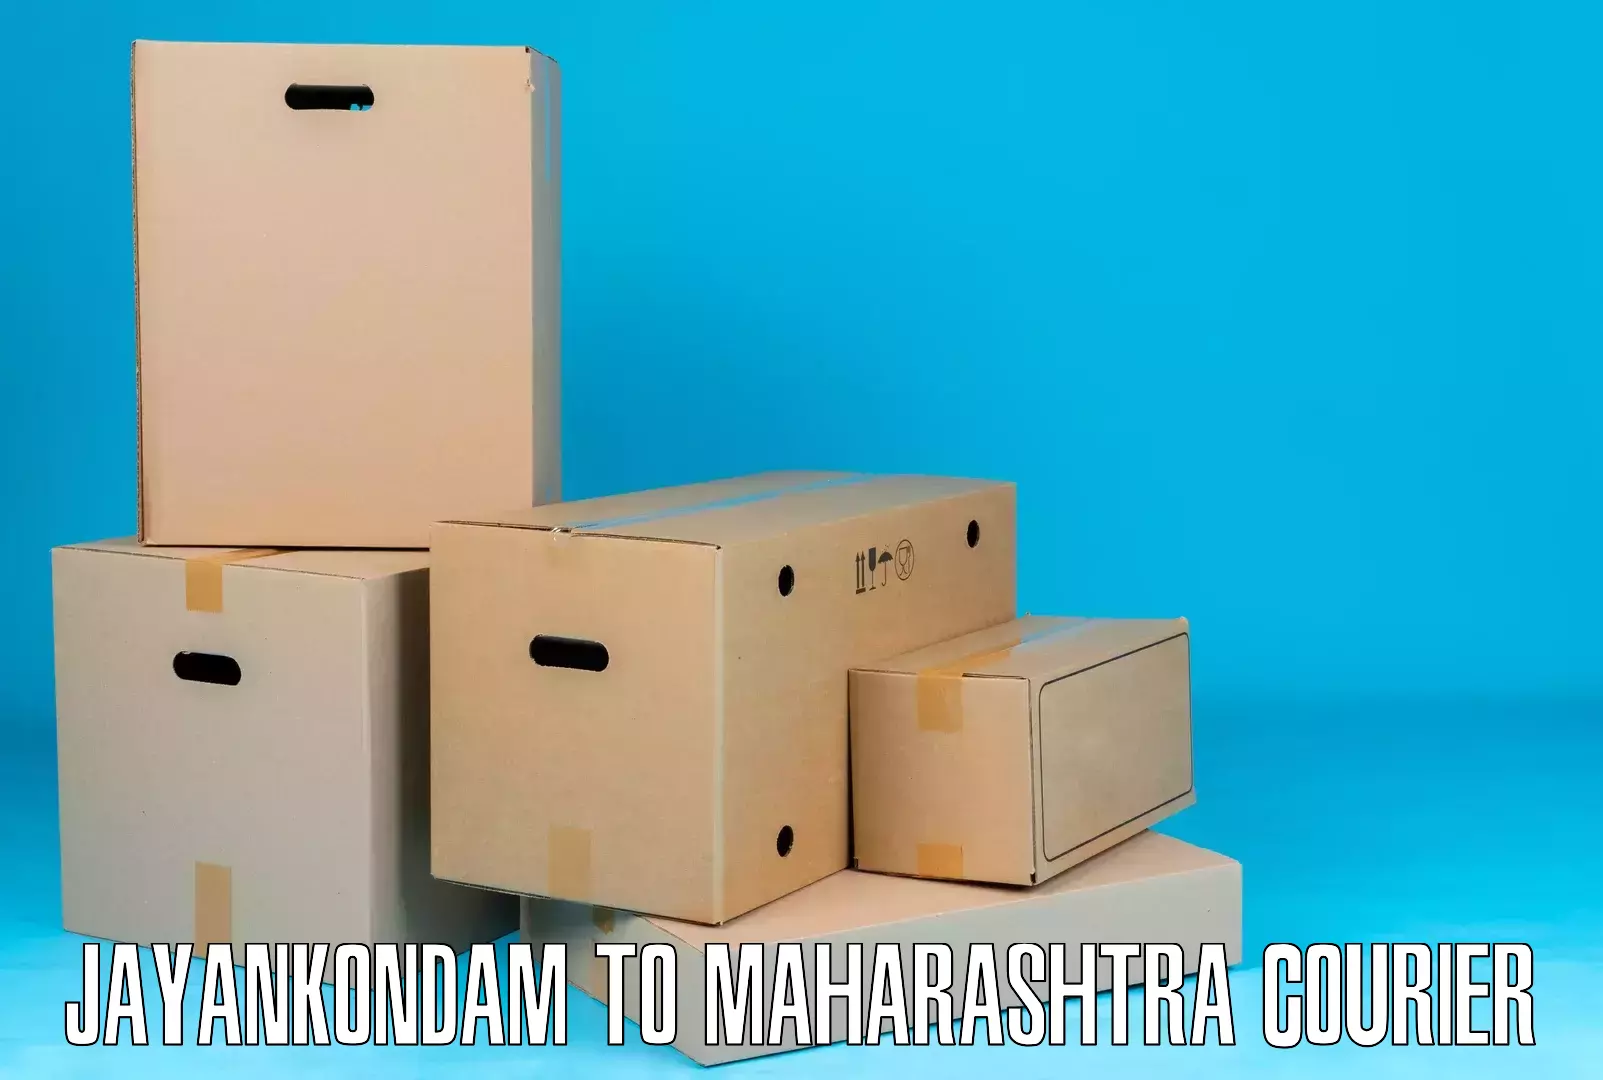 Large package courier Jayankondam to Aheri